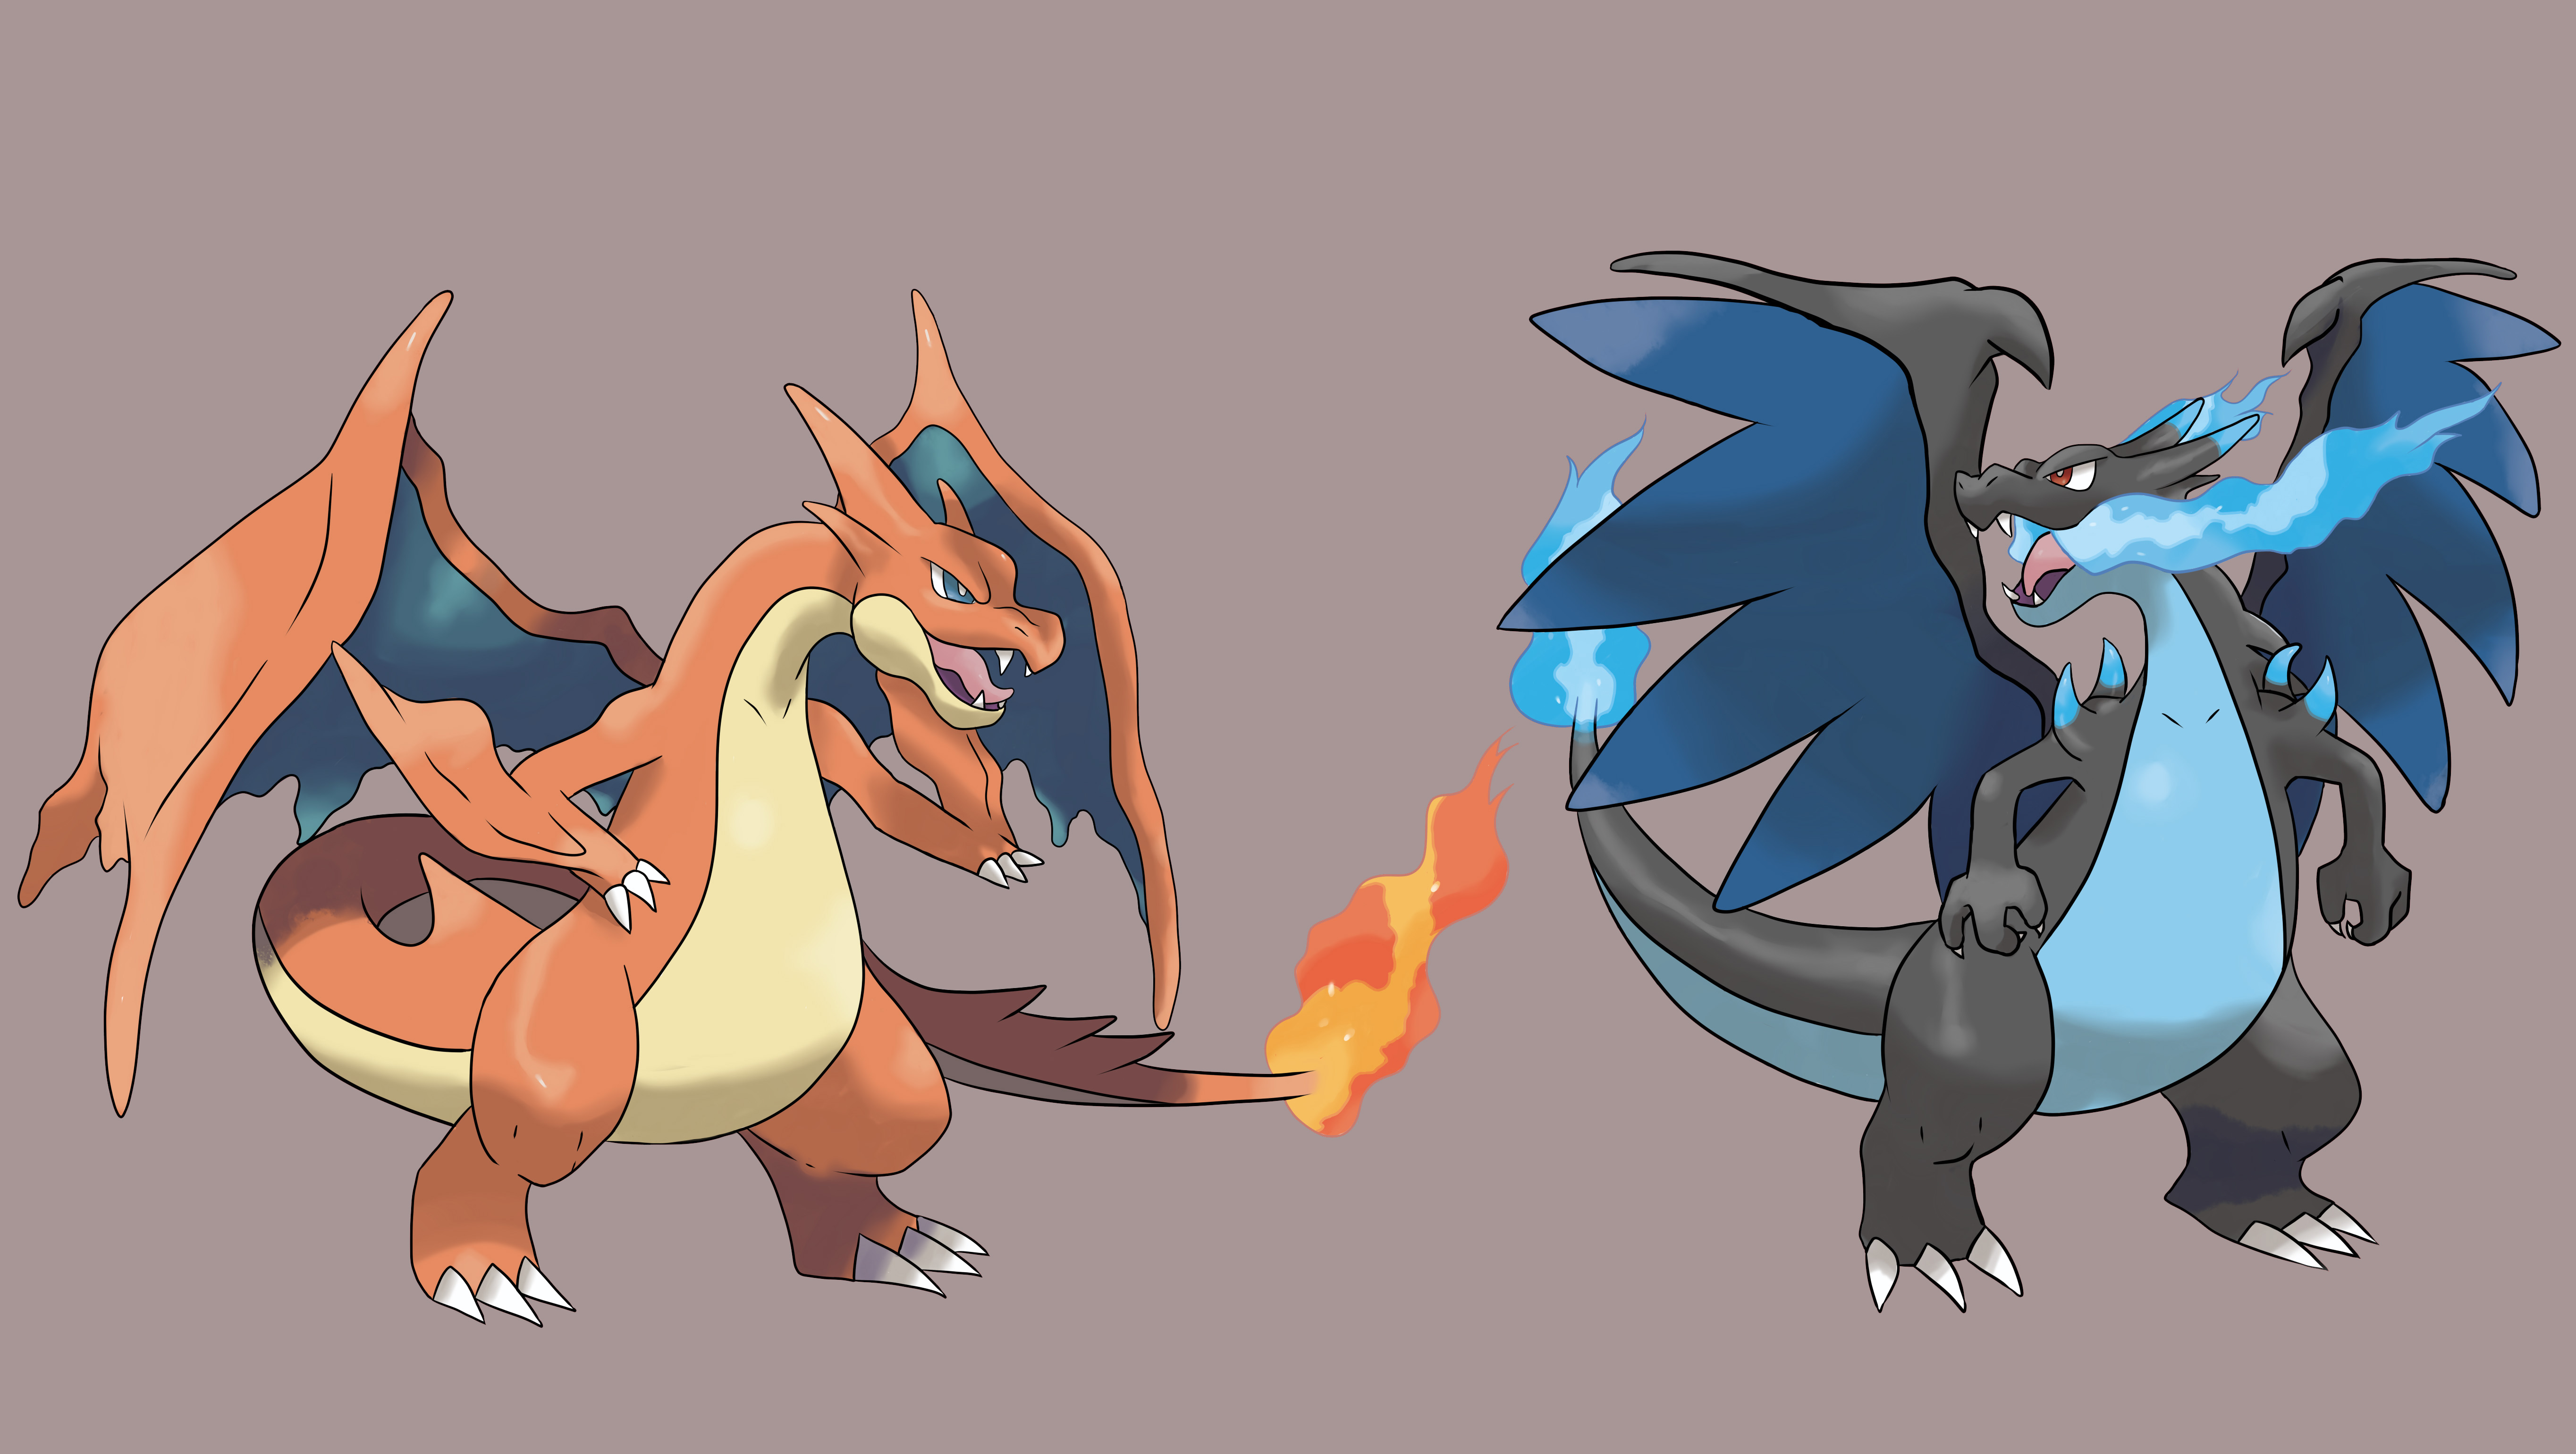 15 Mega Charizard X Pokemon Hd Wallpapers Background Images